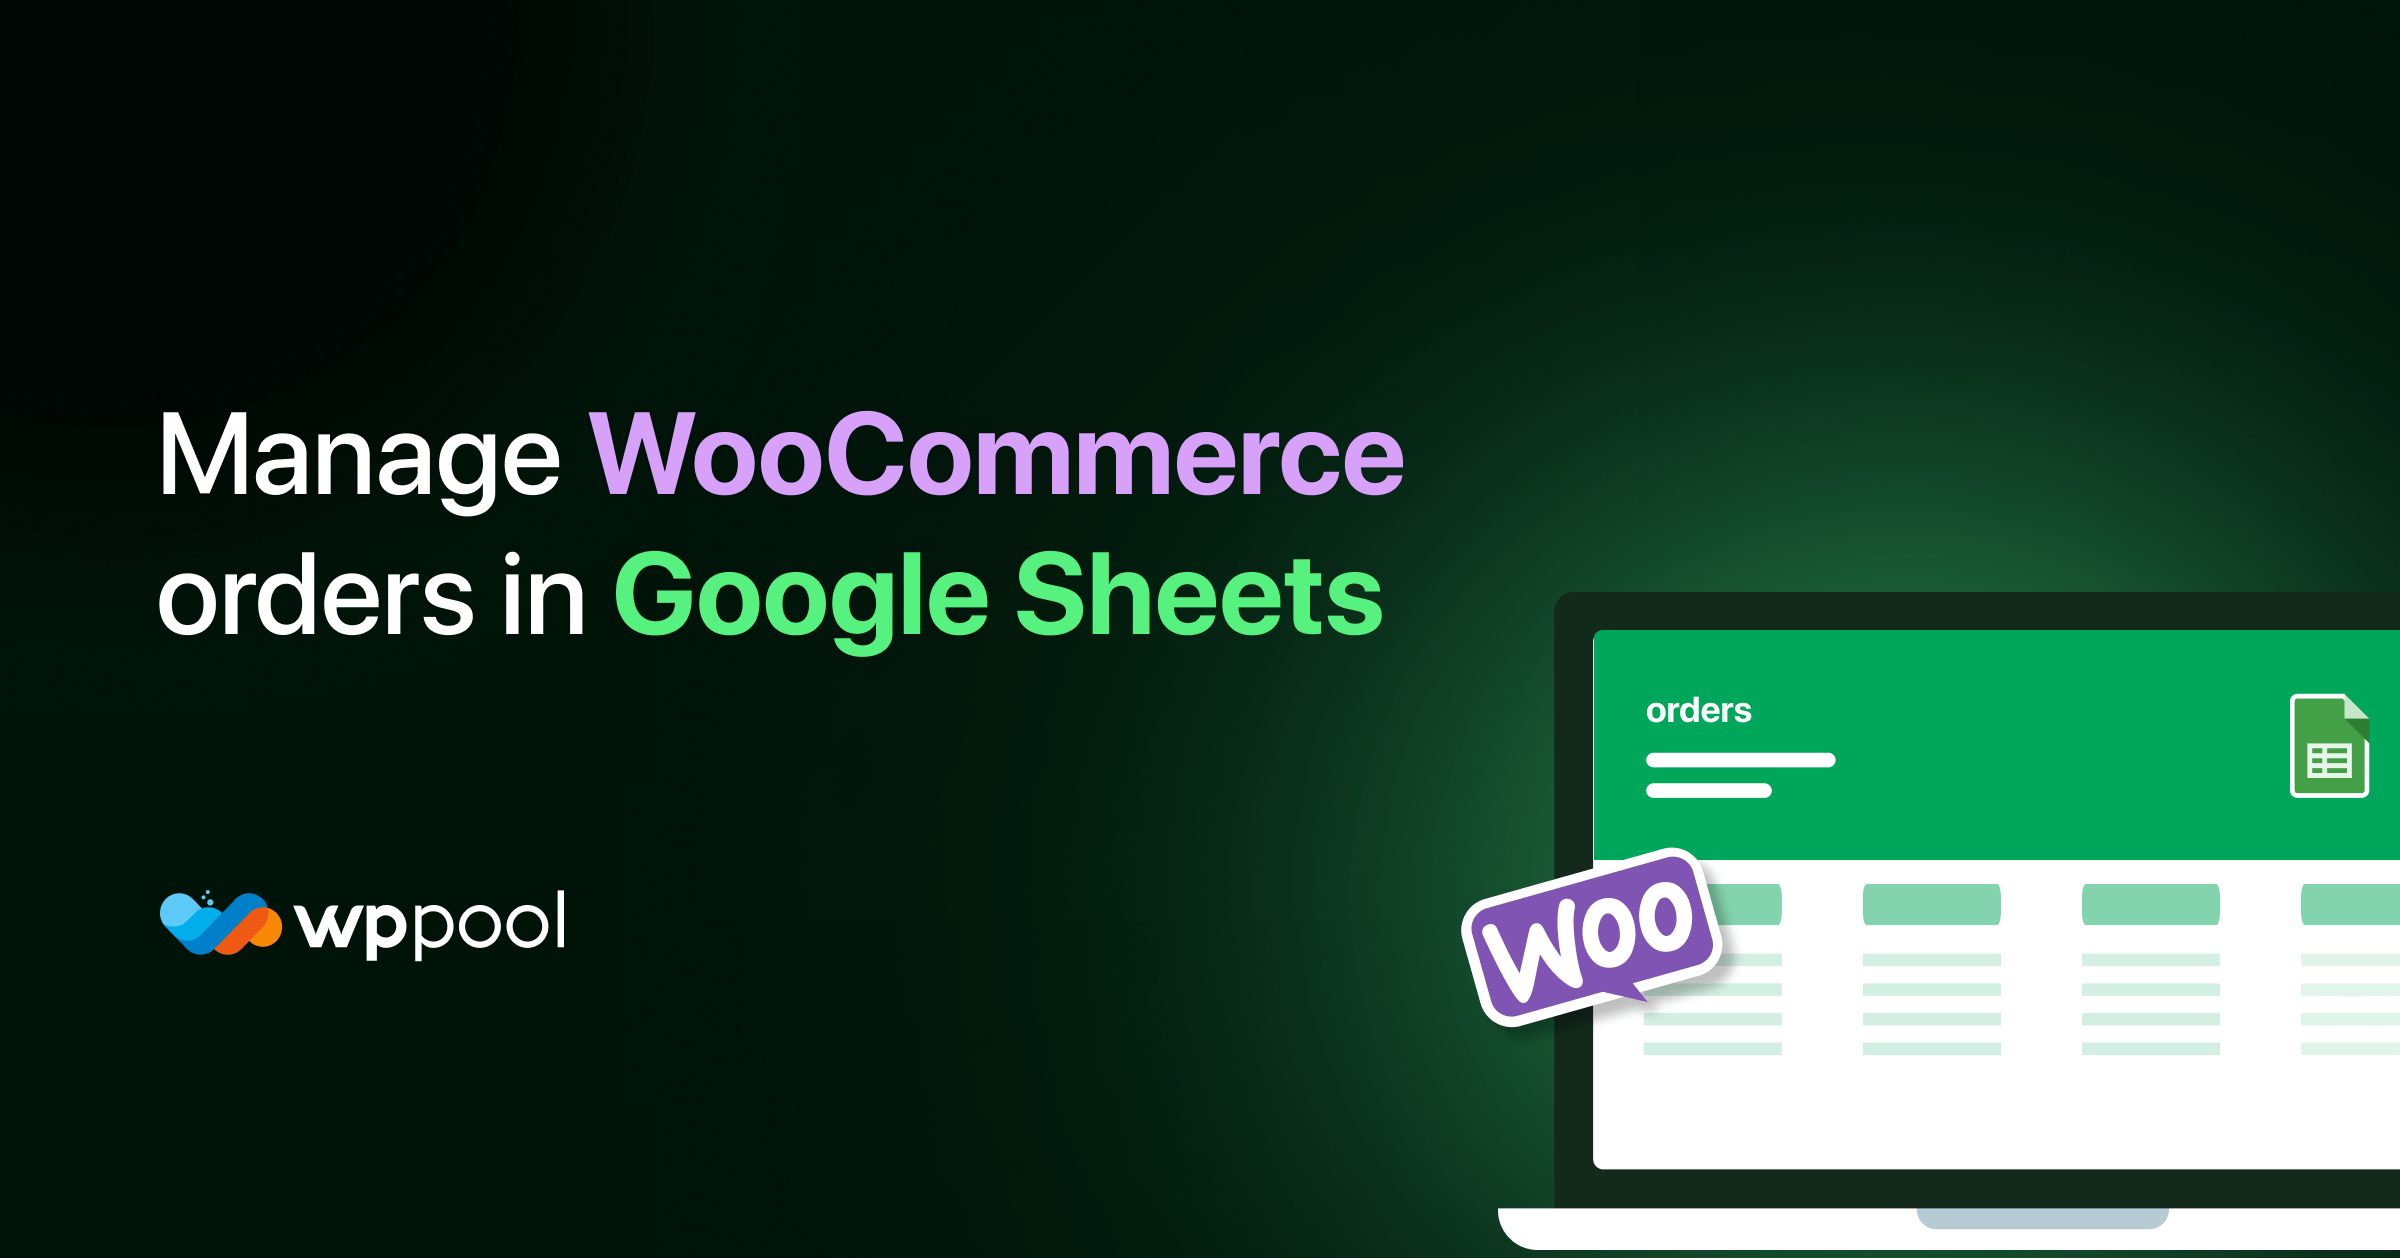 How to manage WooCommerce orders from Google Sheets